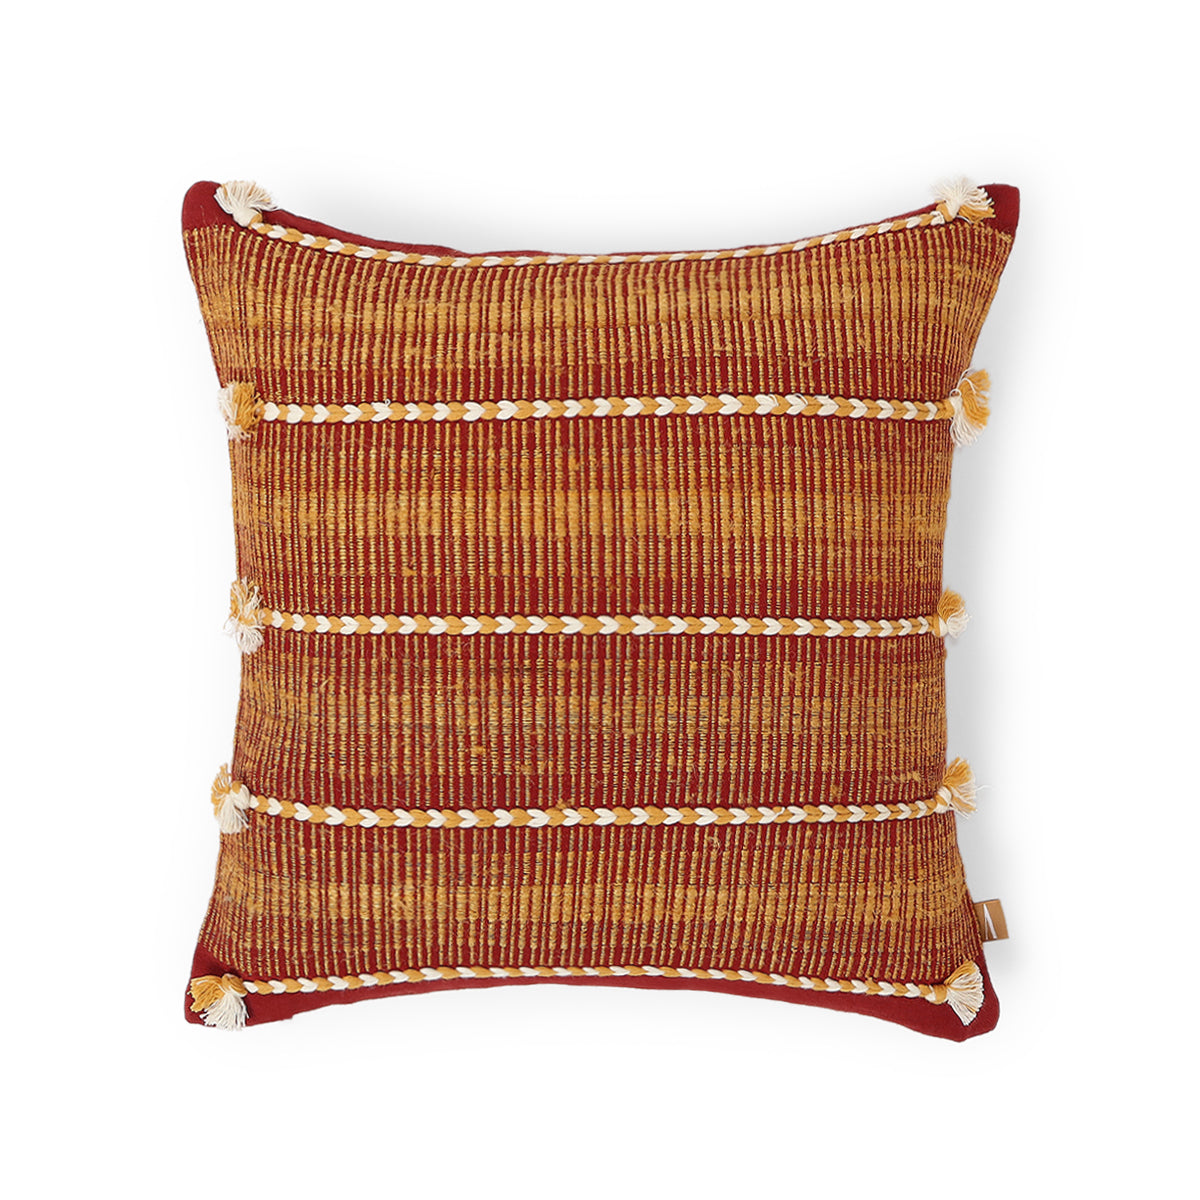 Januja Extra Weft Cotton Cushion Cover